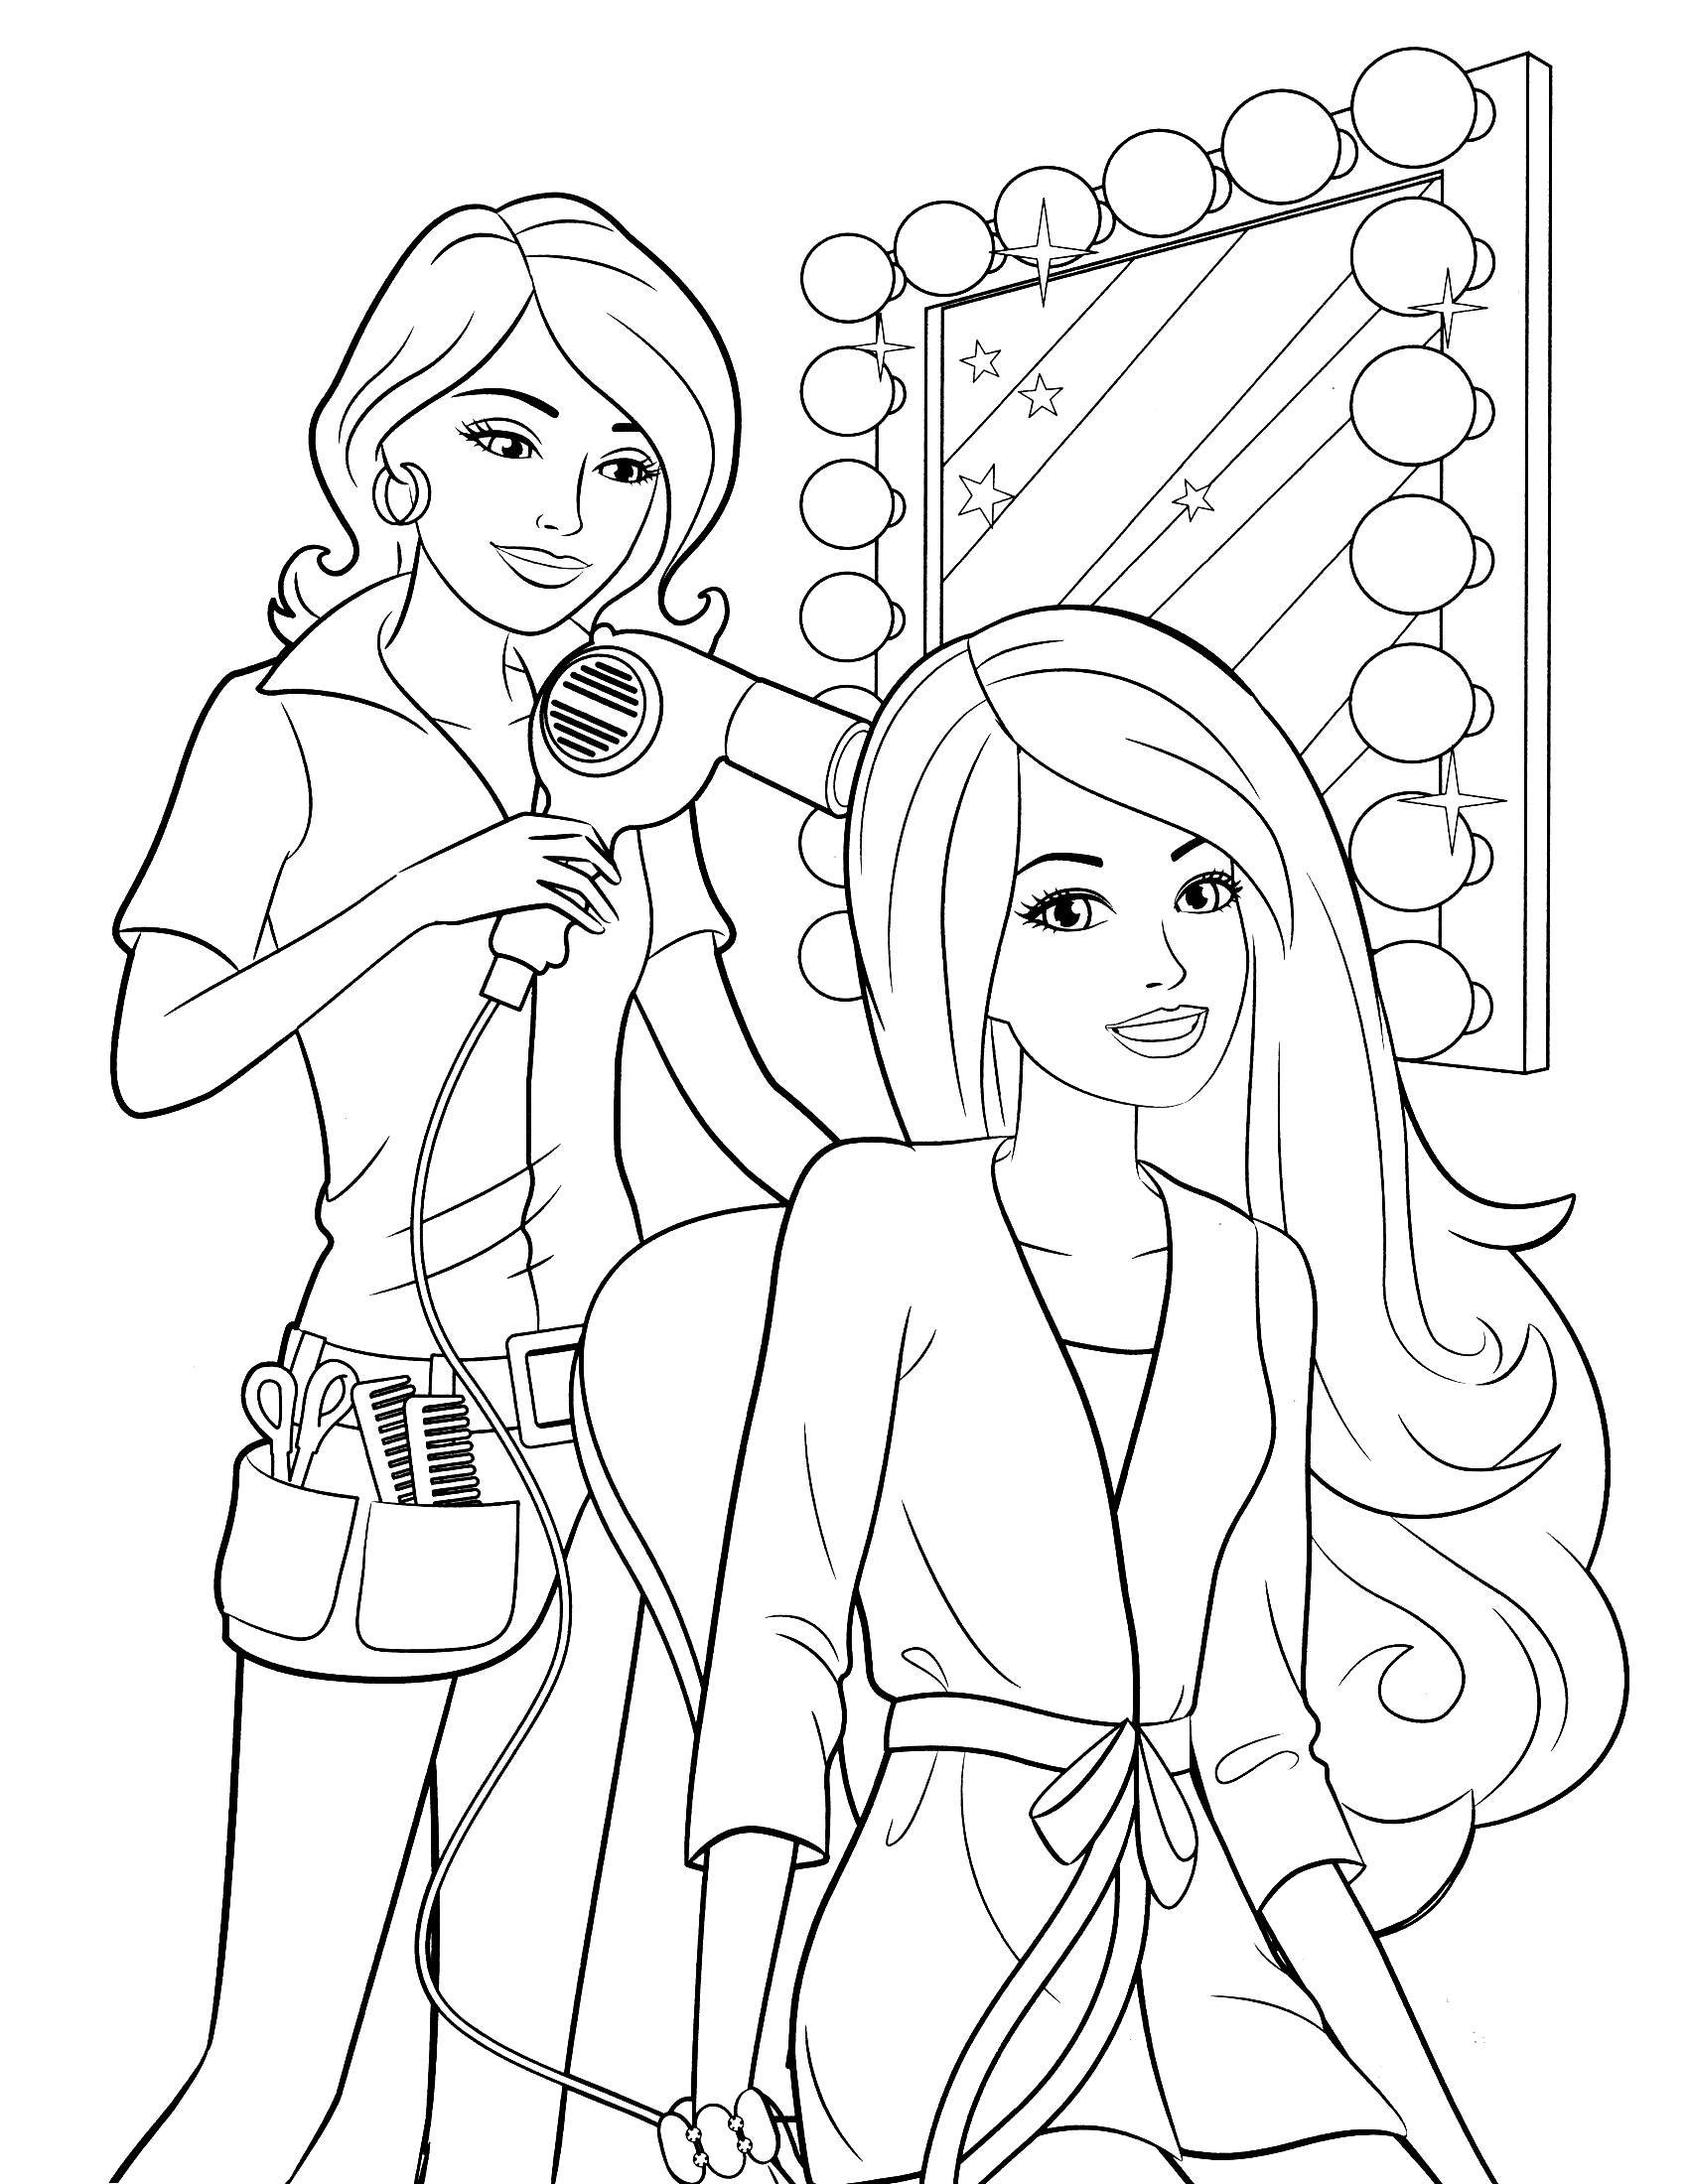 coloring pages of a girl